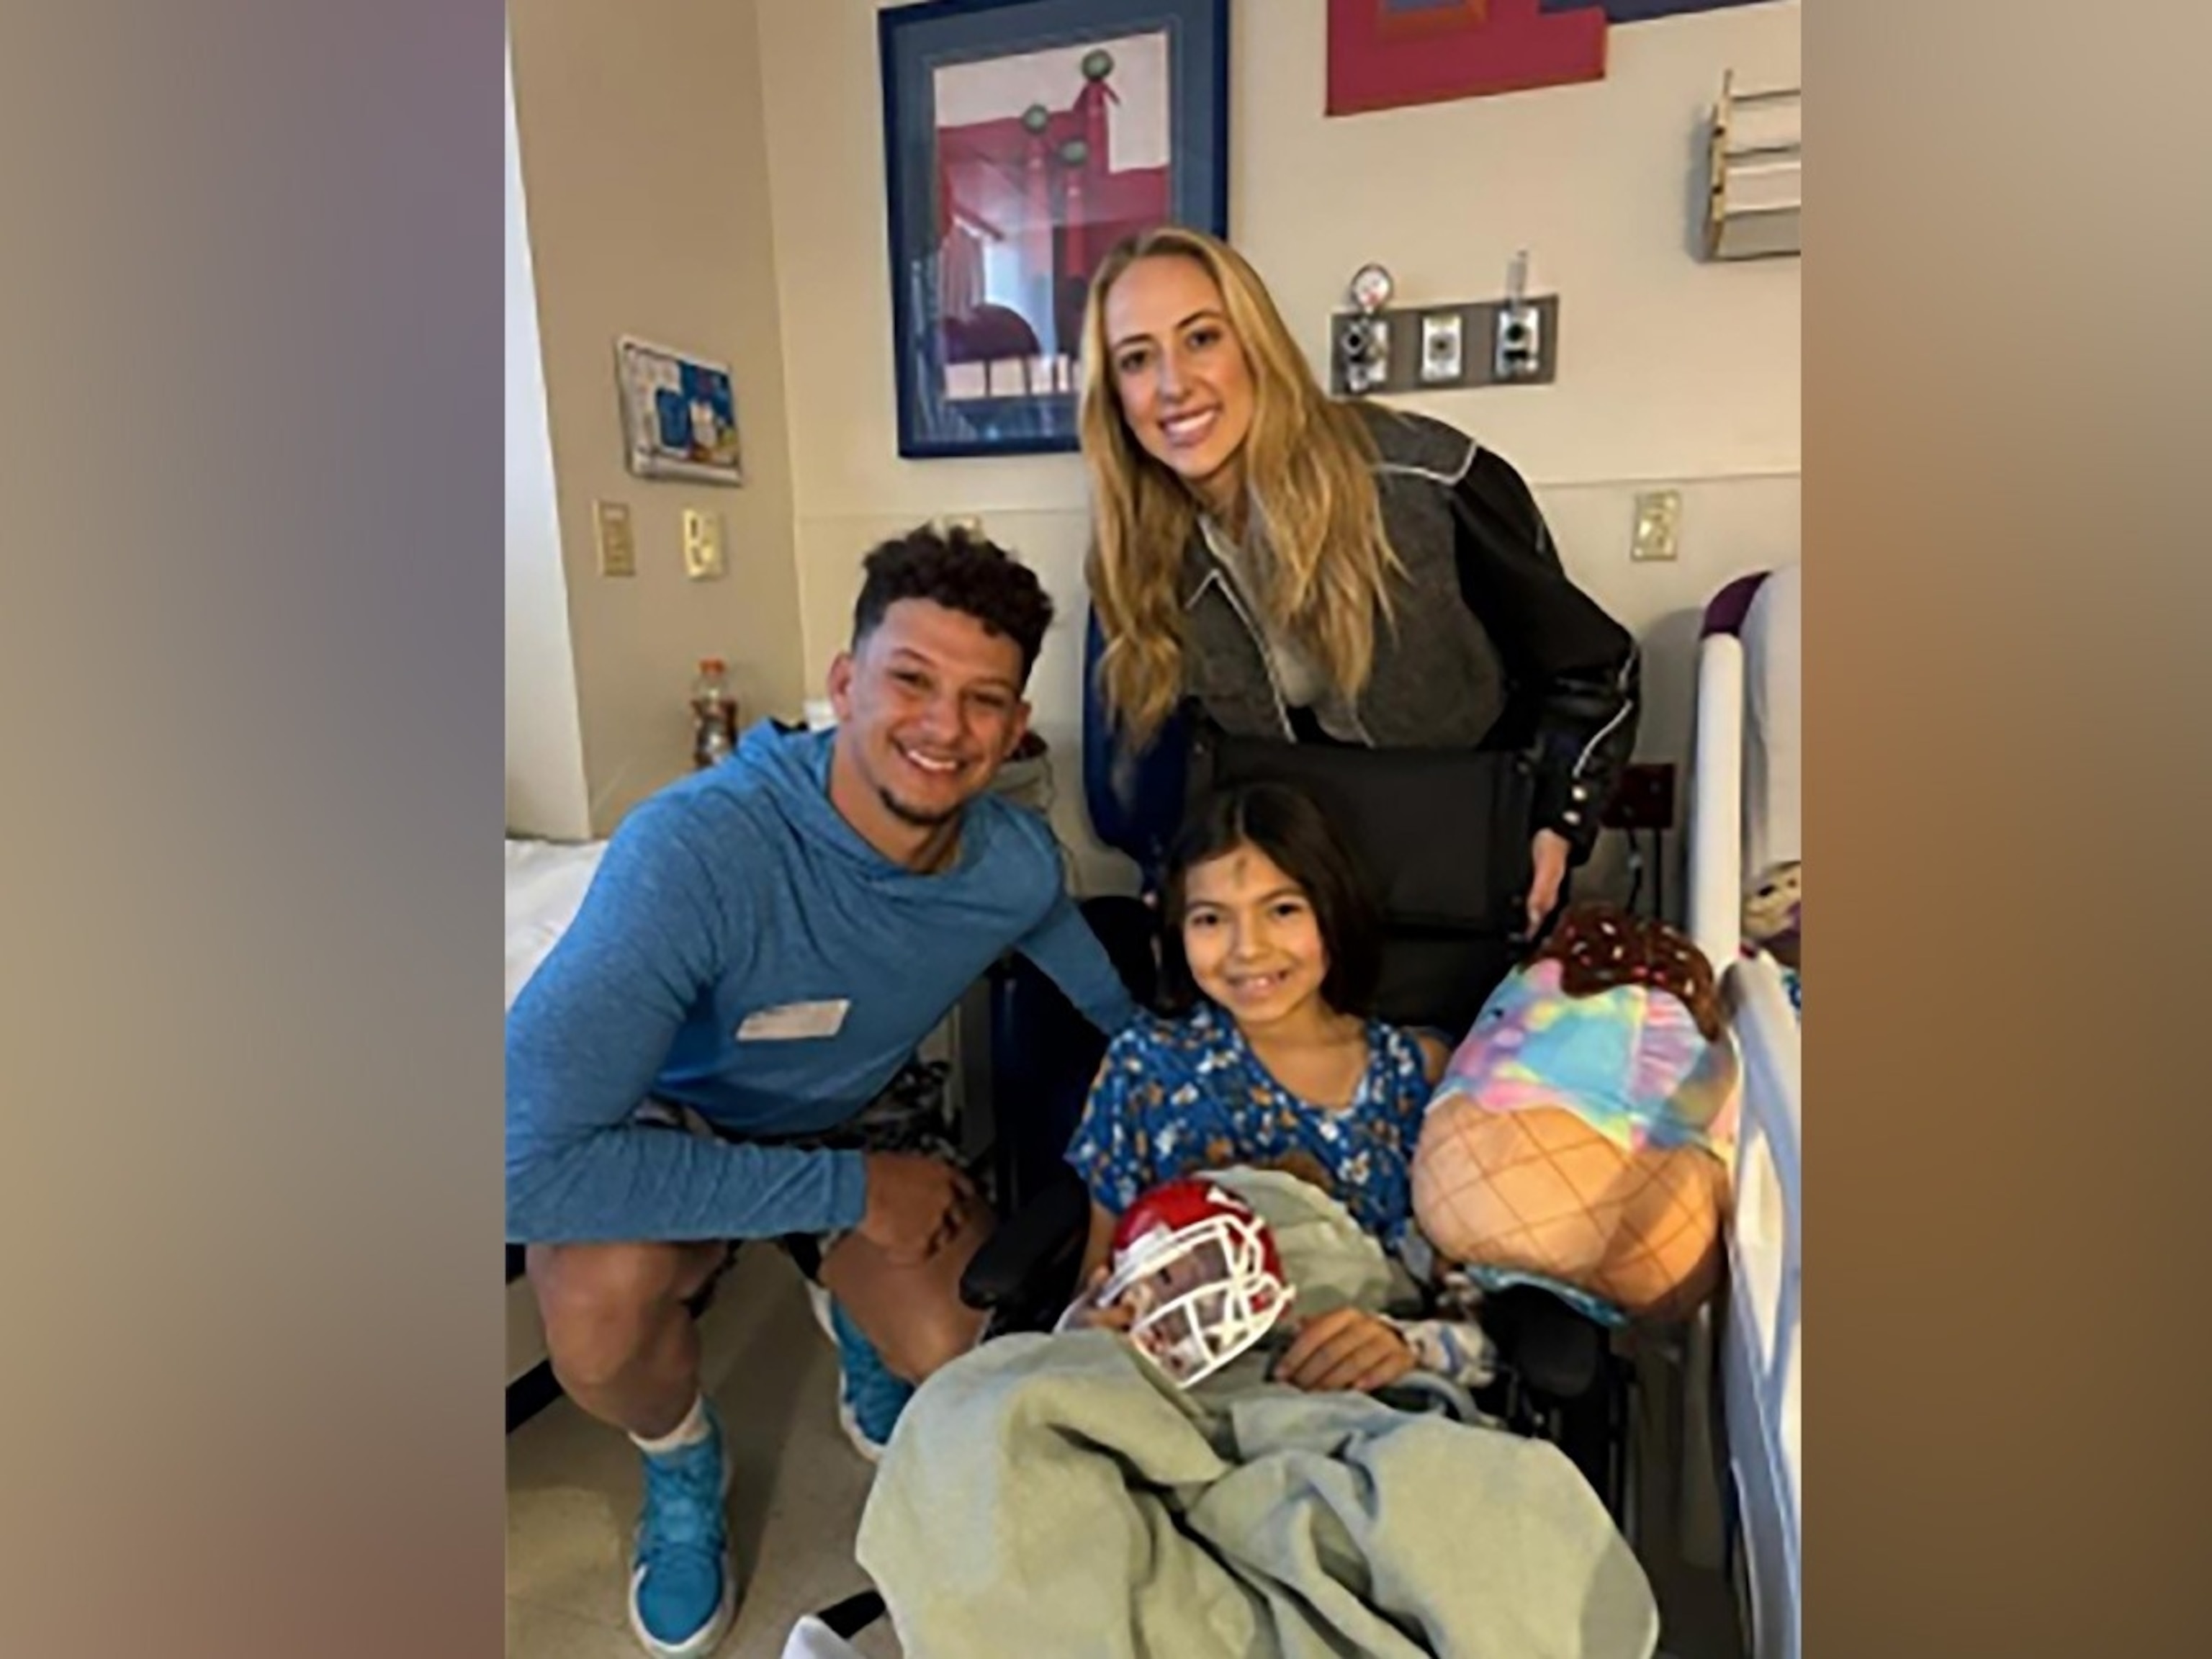 PHOTO: Patrick and Brittany Mahomes visited kids injured in the Chiefs parade shooting.